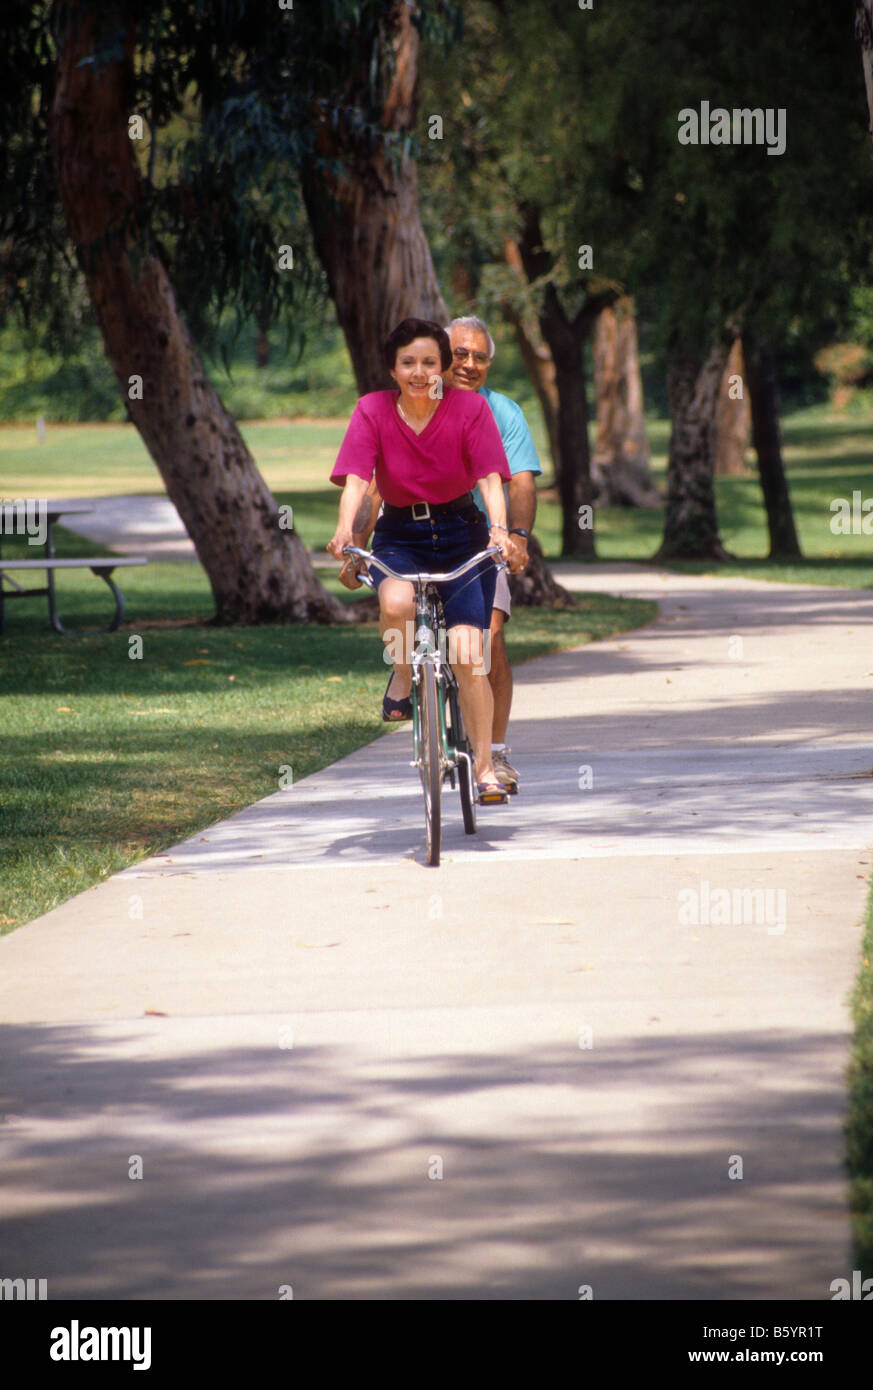 Hispanic couple ride tandem bicycle in park. Stock Photo